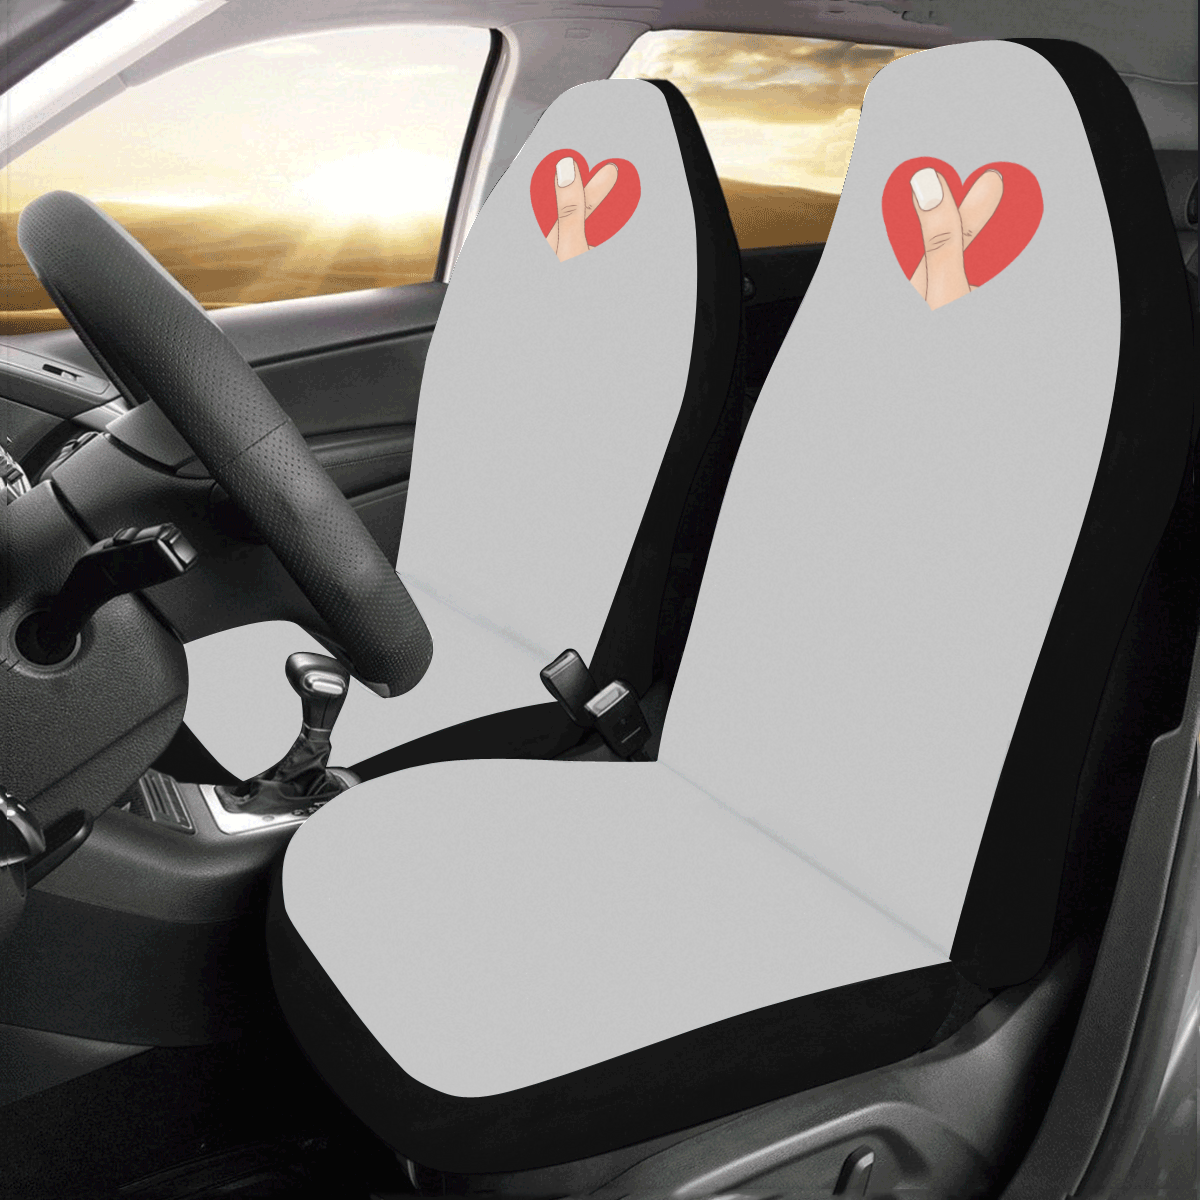 Red Heart Fingers on Silver Car Seat Covers (Set of 2)